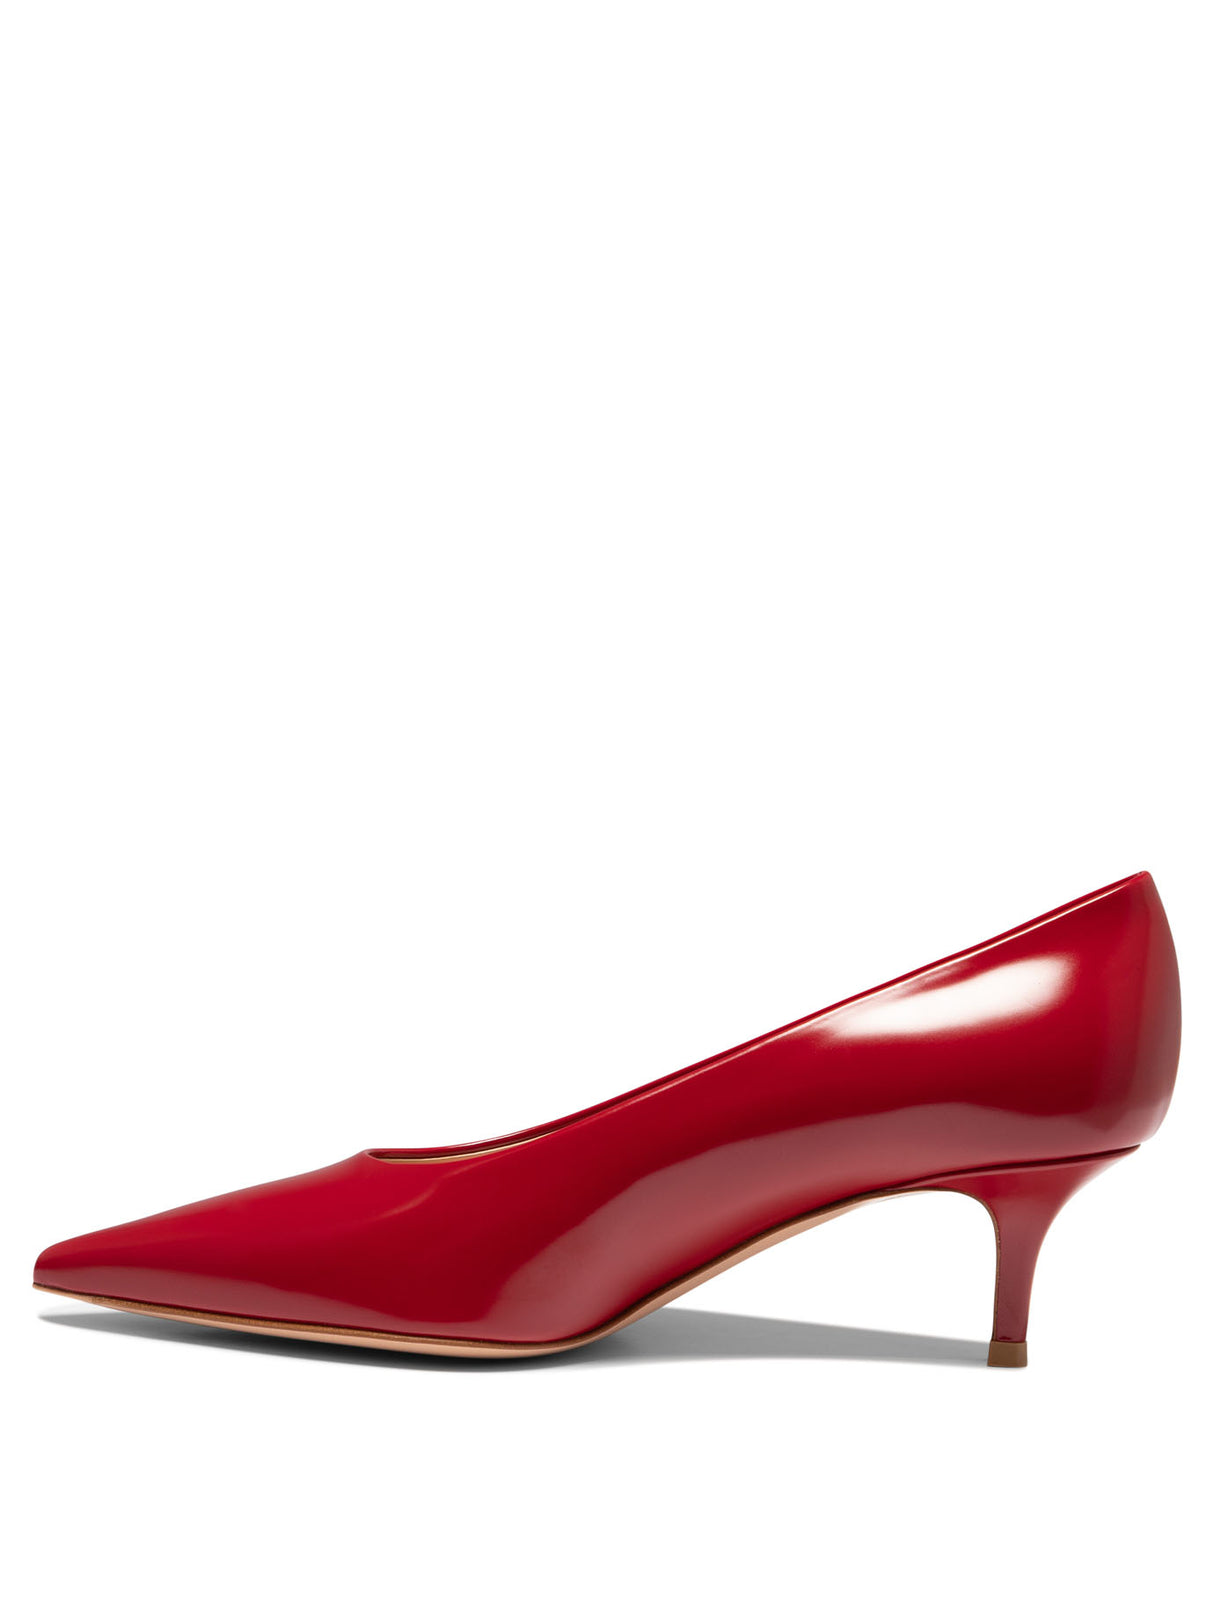 GIANVITO ROSSI Classic Red Leather Pumps for Women - FW24 Collection